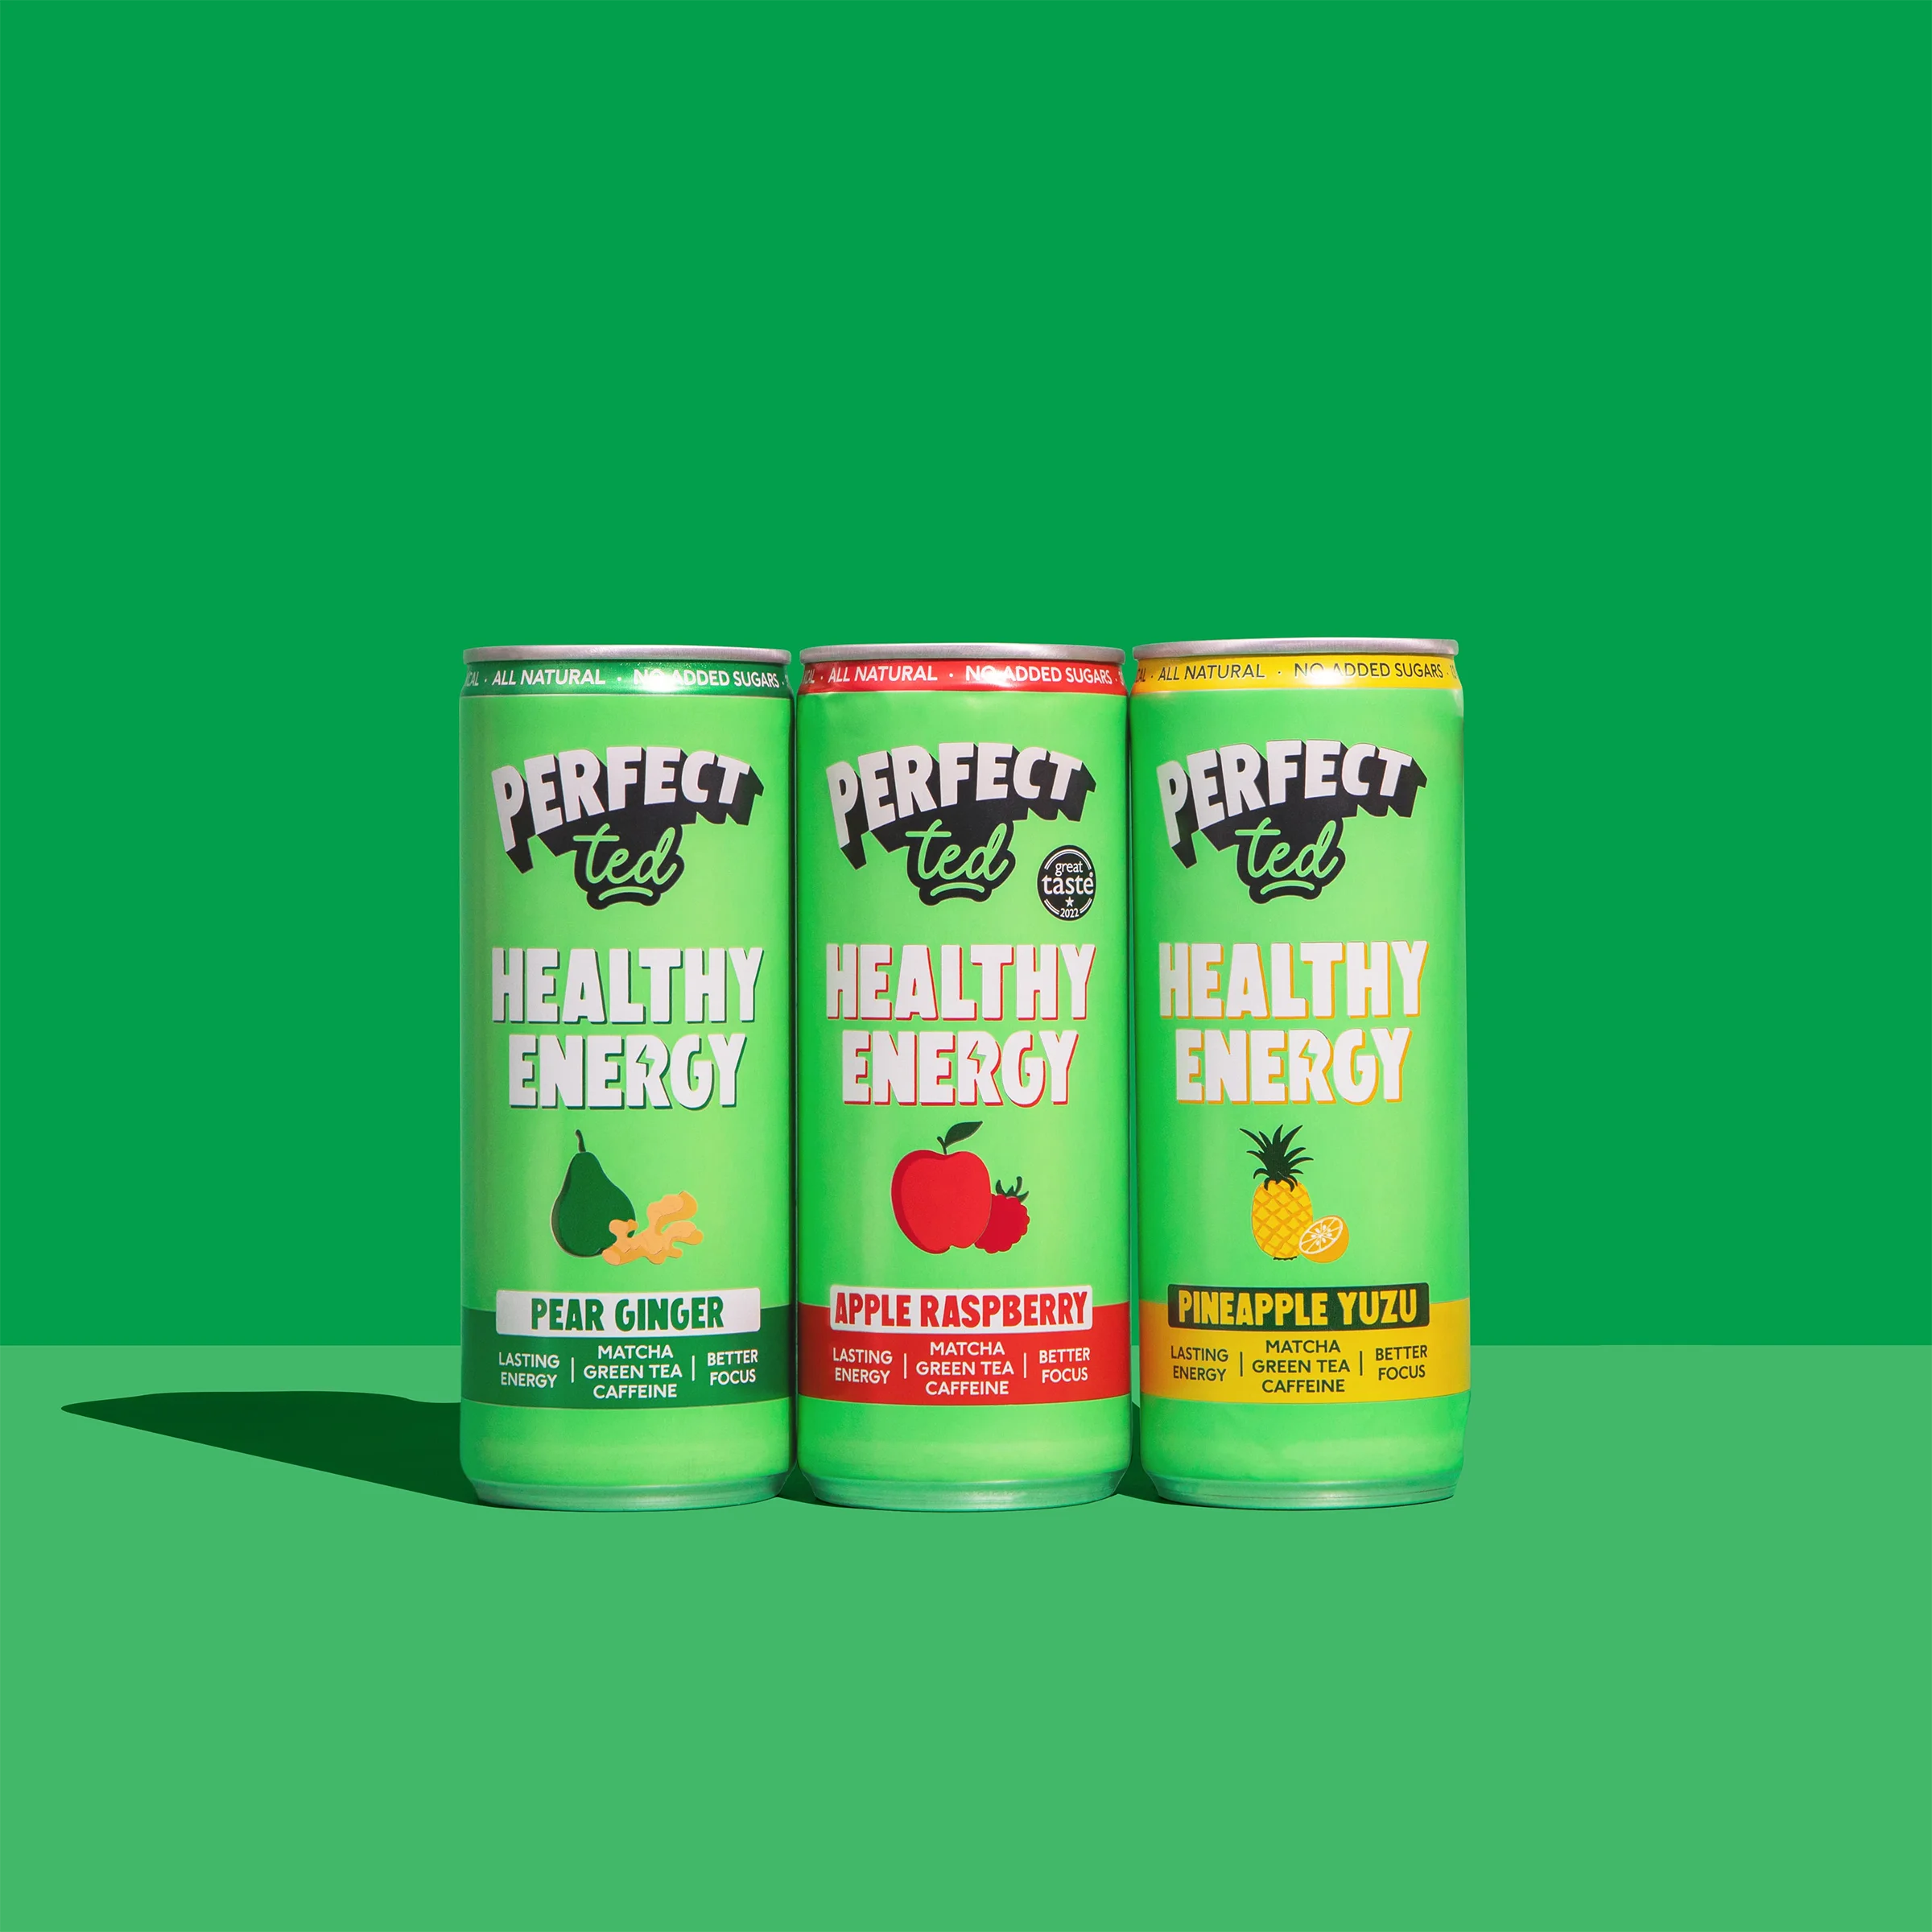 Trio of PerfectTed healthy energy drinks on bright green background